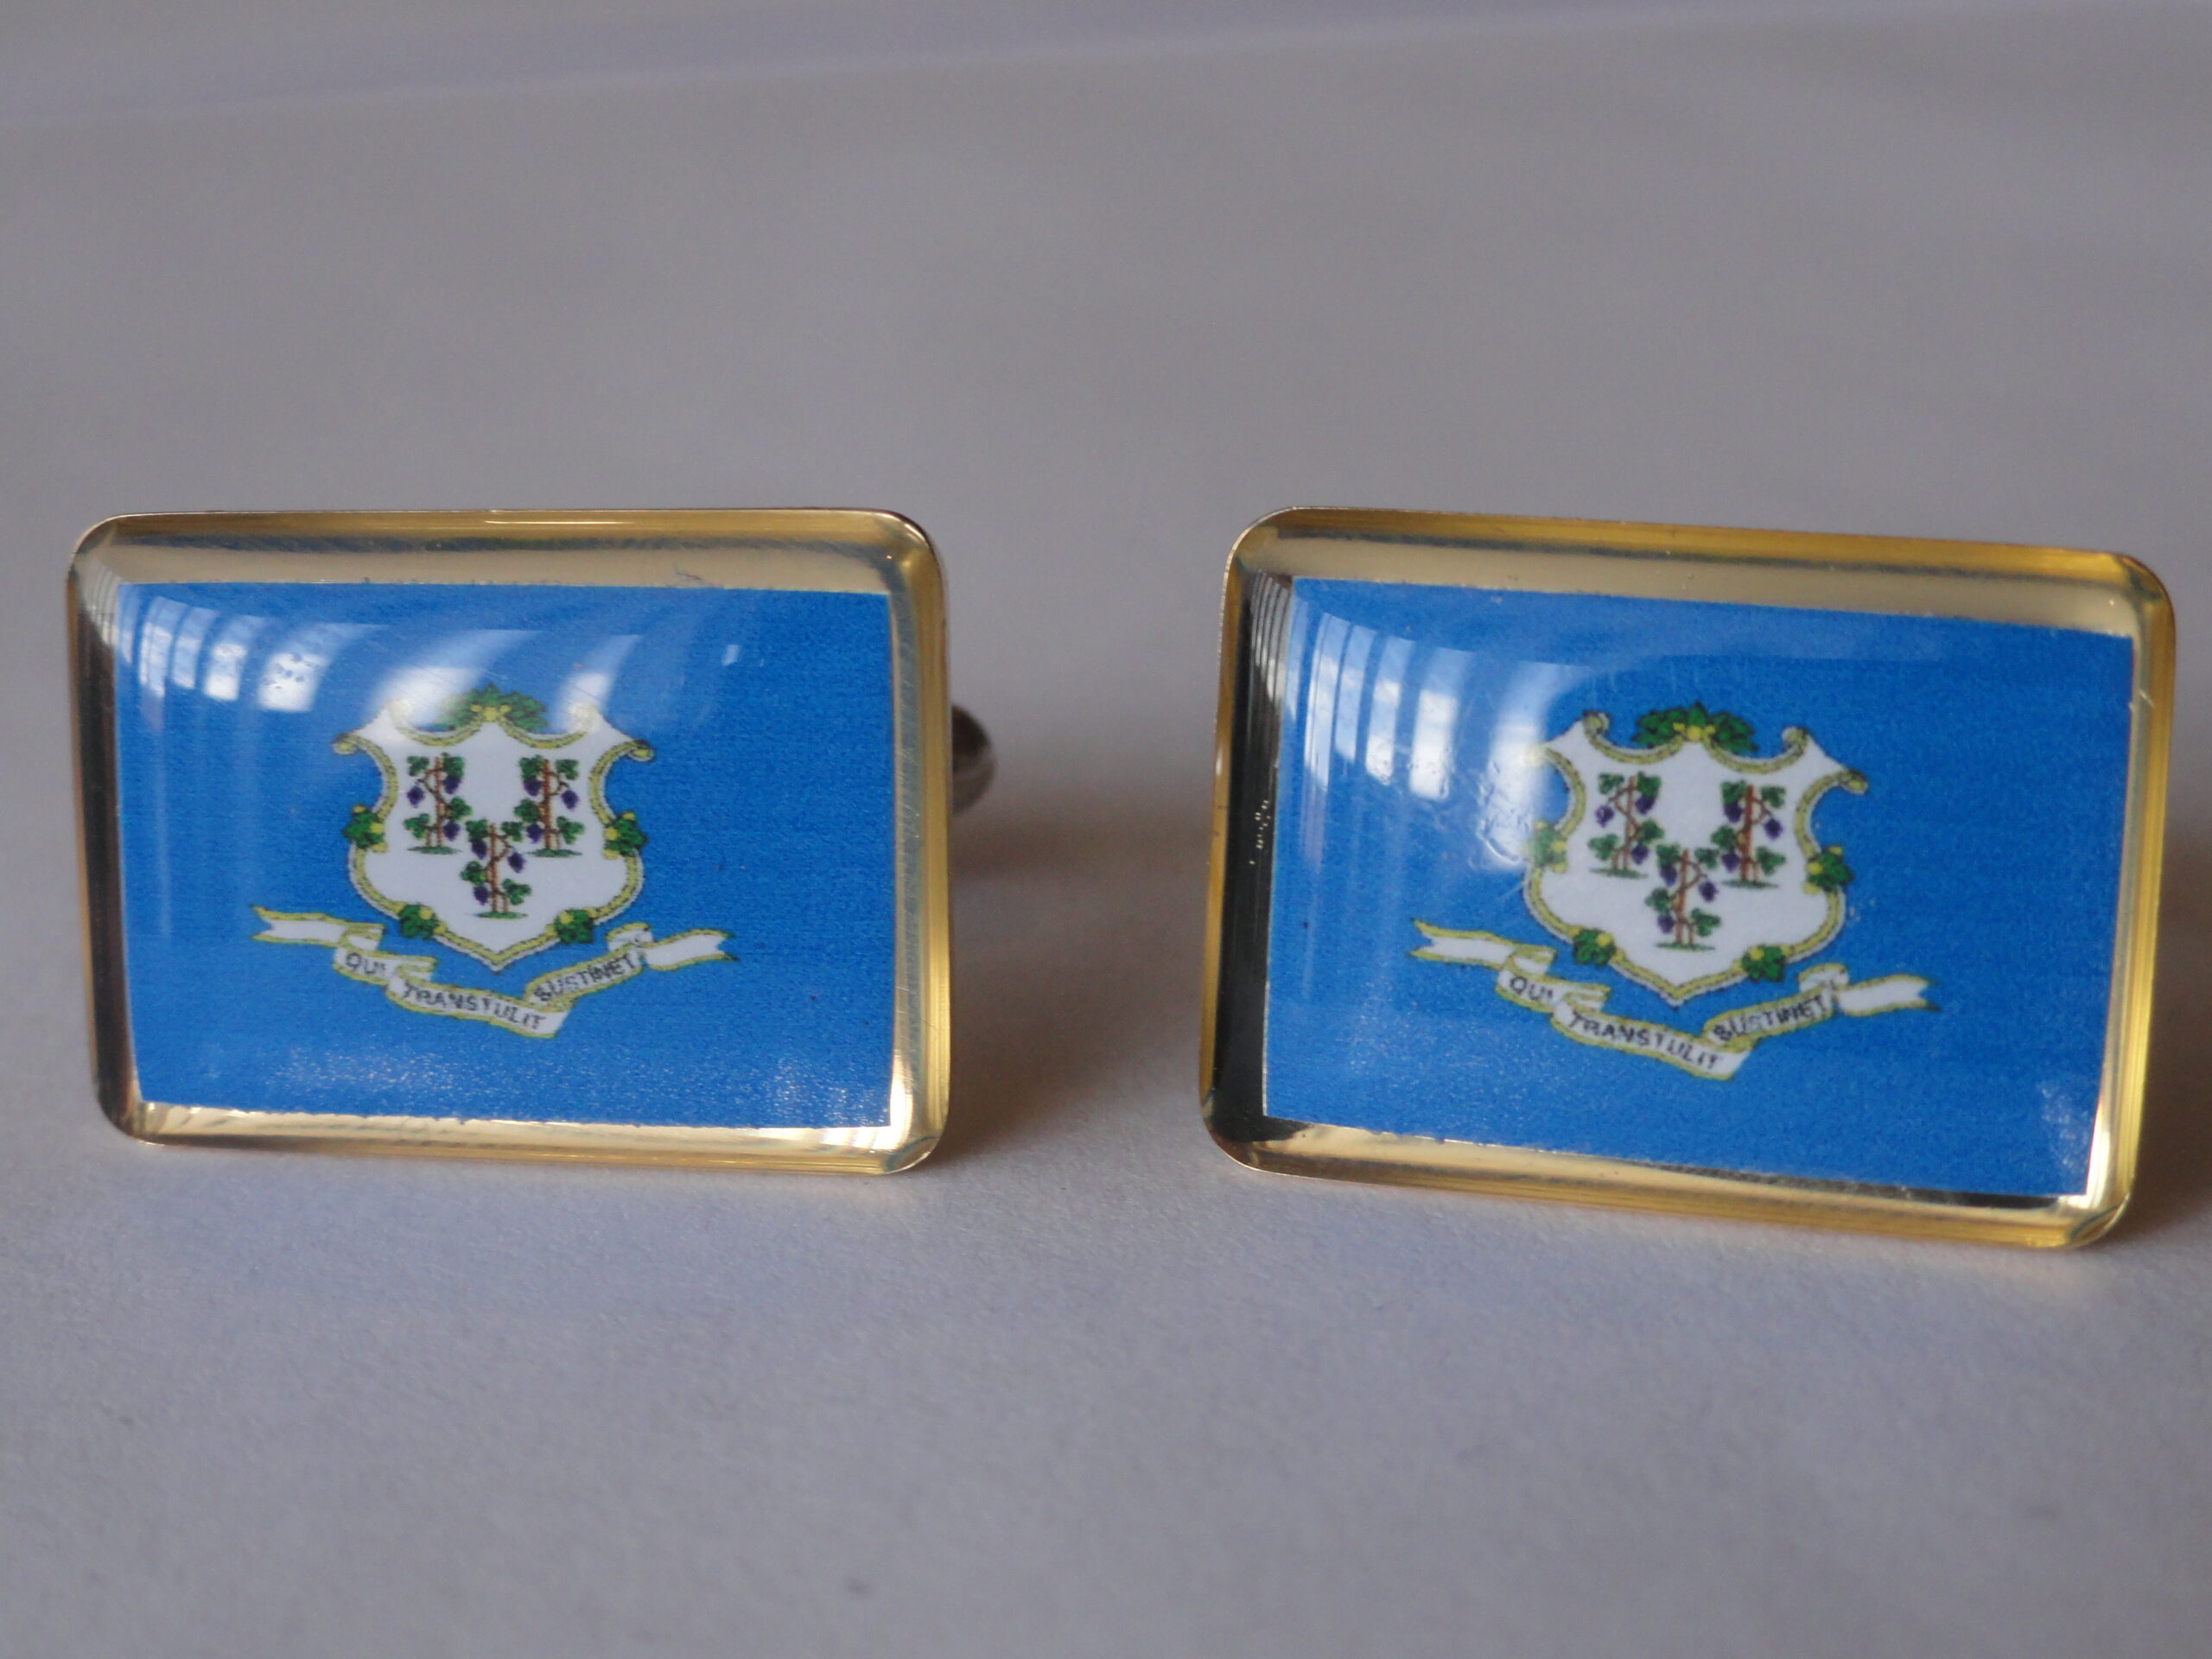 Silver Toned Etched Connecticut State Flag Cufflinks 